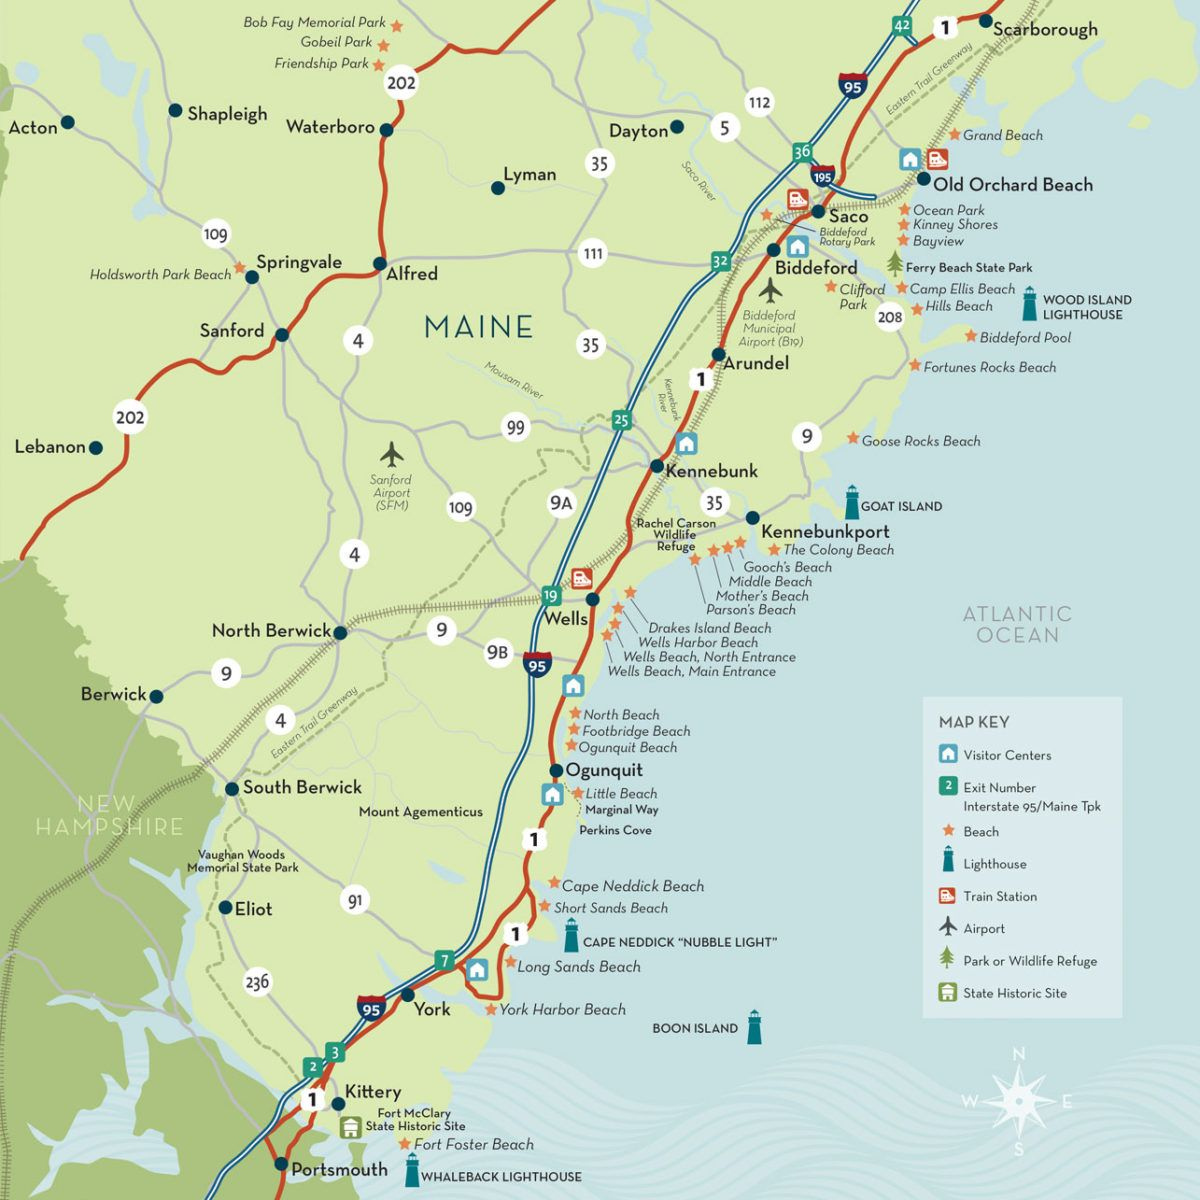 Download A Copy Of The Maine Beaches Map In 2020 Maine Beaches Old 